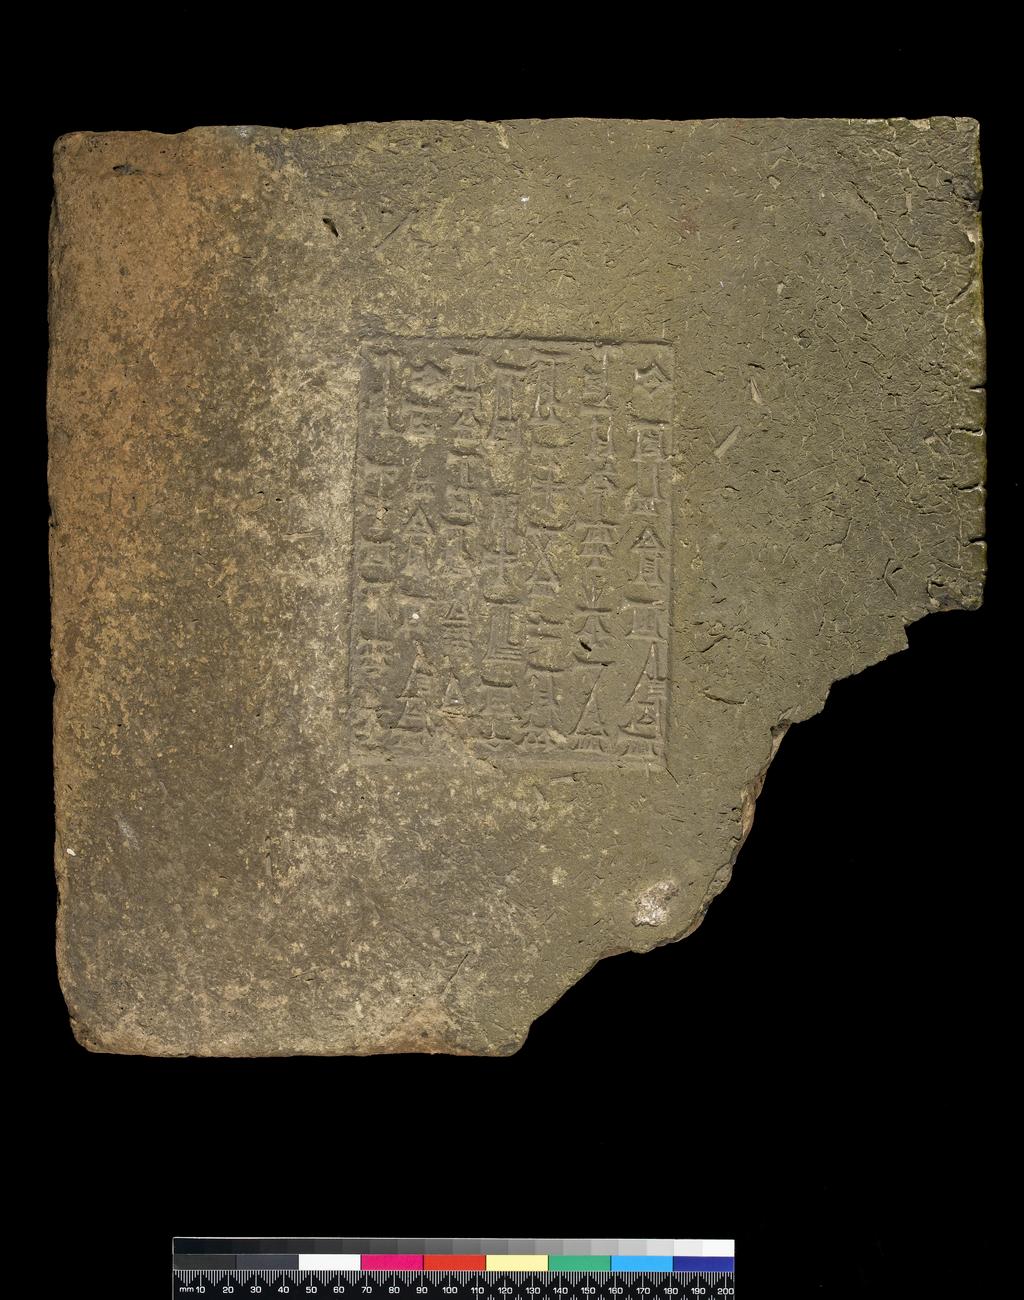 An image of Architectural element. Brick, inscribed with dedication of Nebuchadnezzar II. Find Spot: Babylon, Iraq. Clay, depth 0.08 m, length 0.325 m, width 0.325 m, c. 604-542 BC. Neo Babylonian. Notes: inscription: d Nabu(AG)-Kudur-(NIG.DU)ri-usur(SES) Sar (LUGAL) Ba-bi-i-lu ki za-ni-in E.SAG.ILA u E.ZI.DAU maru (DUMU) a-Sa-ri-du Sa d Nabu (AG)-apal (IBILA)-usur (SES) Sar (LUGAL) Ba-bi-i--lu ki; written in archaic, Old Babaylonian style which accounts from some strange readings; comment, transcription and translation by R.G. Killick 1980.